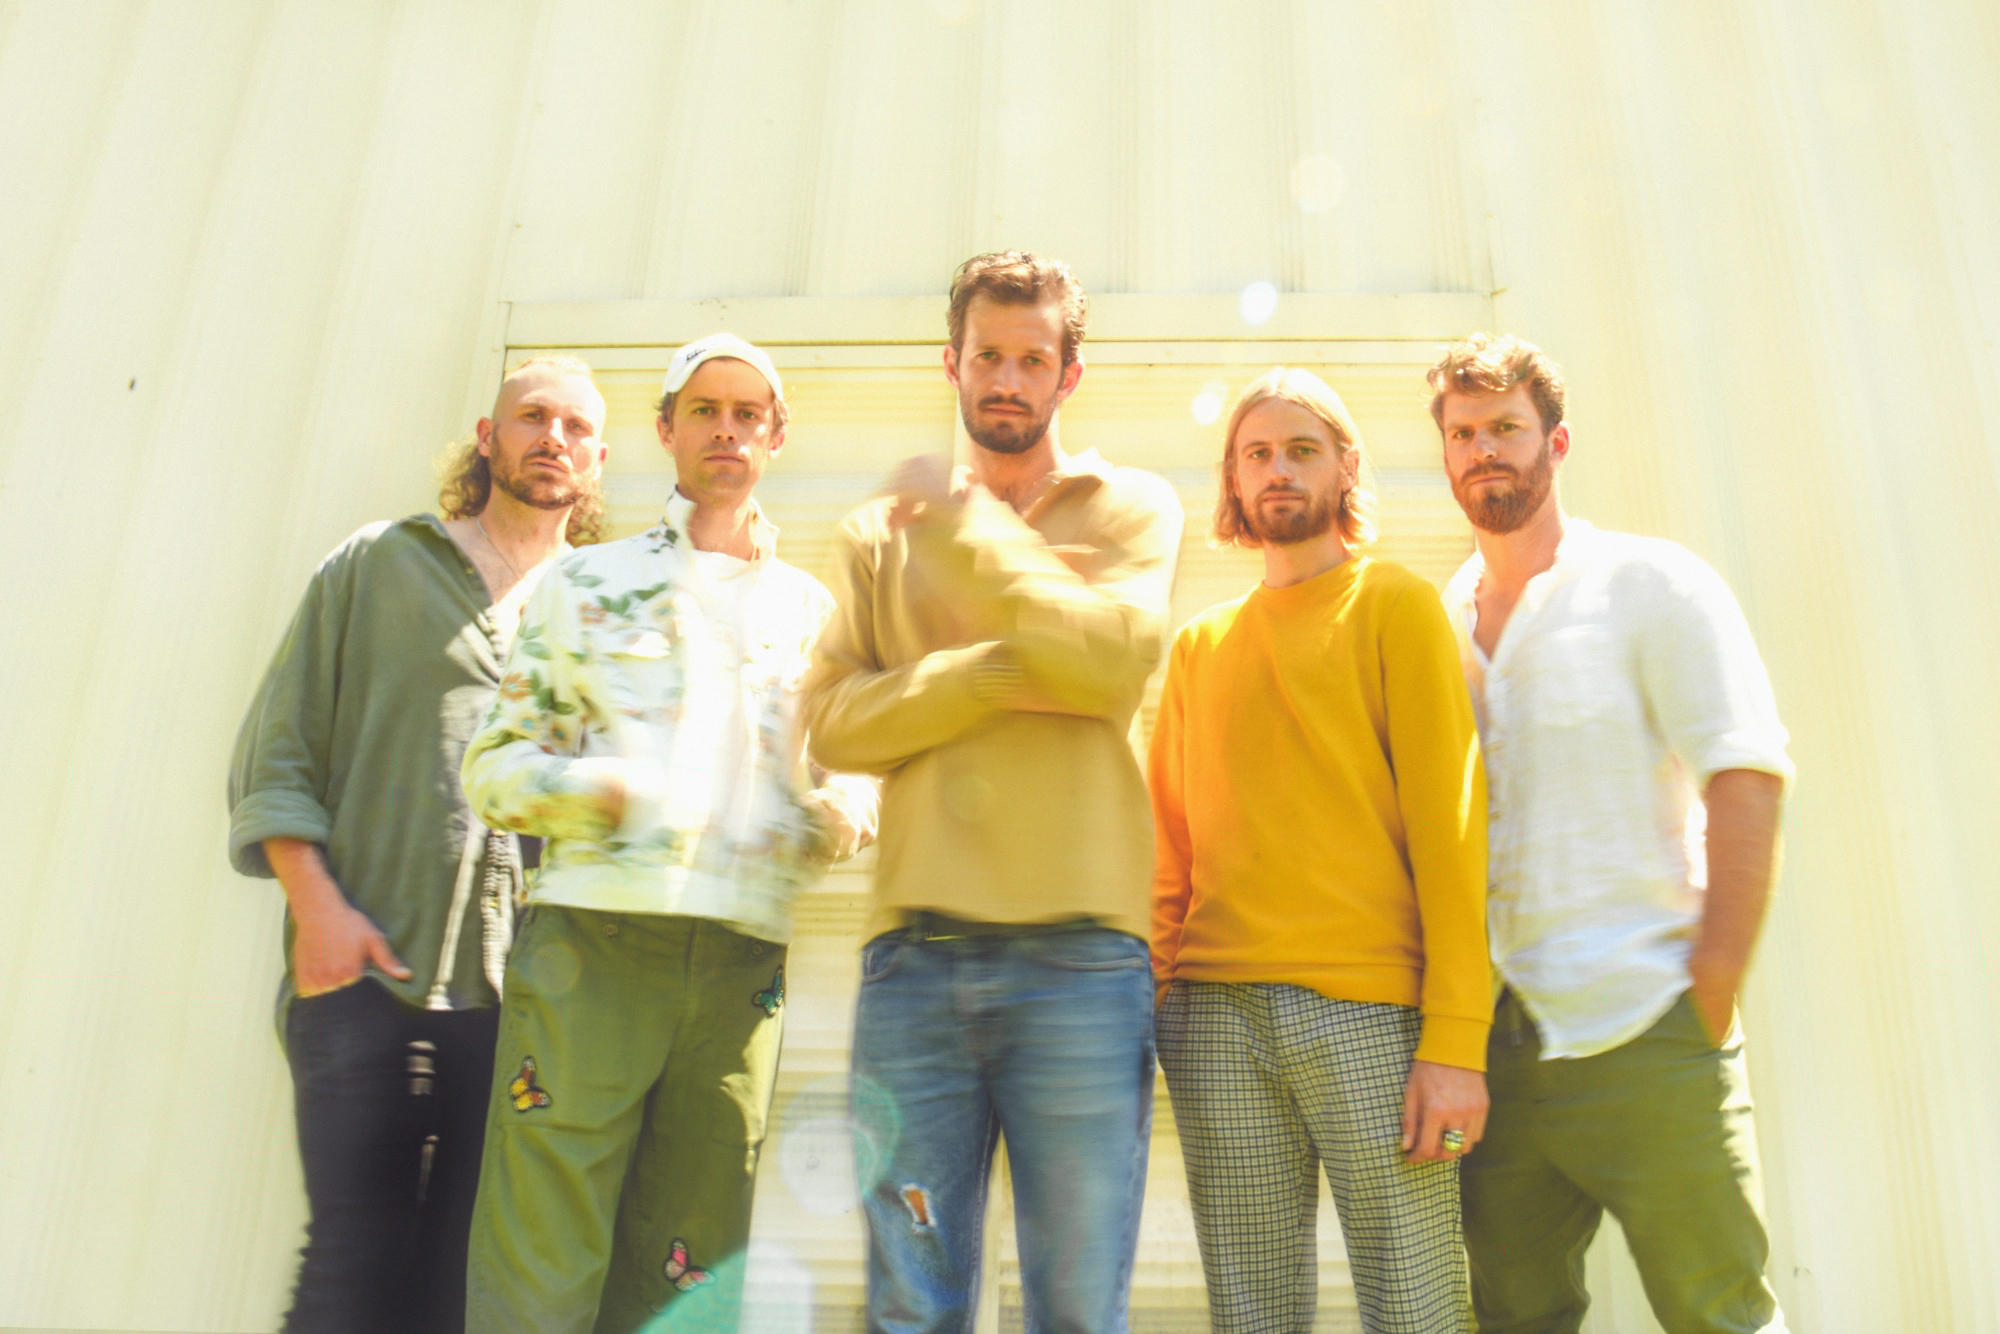 THE RUBENS ANNOUNCE RESCHEDULED ‘LIVE IN LIFE’ TOUR DATES FOR 2021